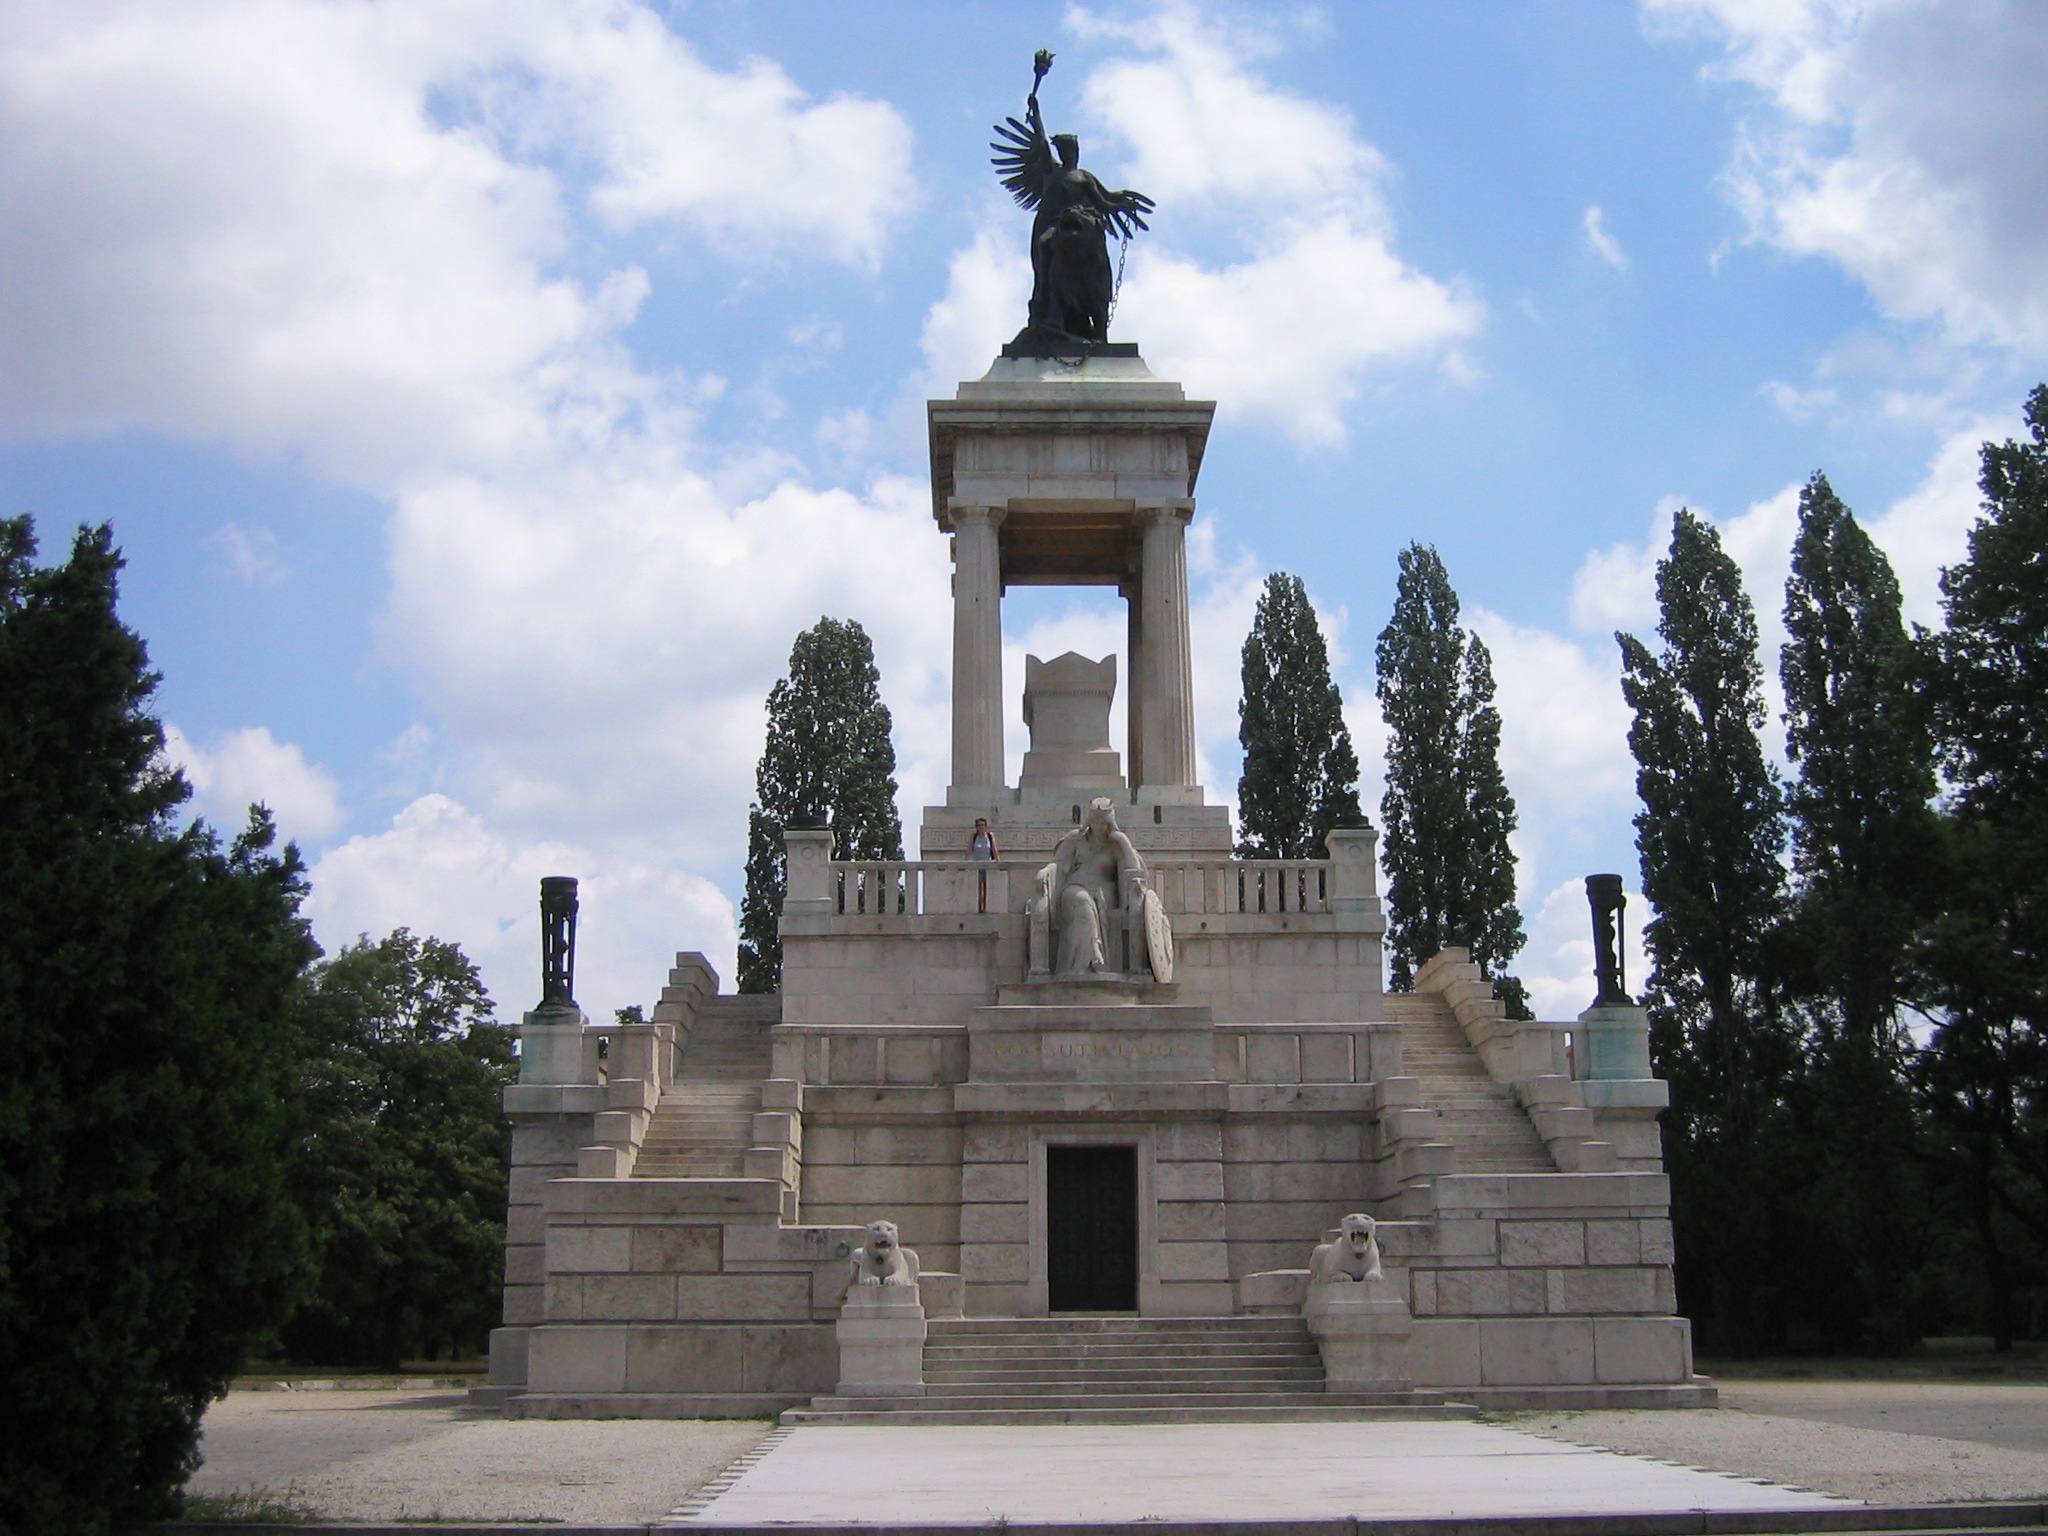 Tomb of Kossuth Lajos - Father of modern Hungary (find Susan at top)